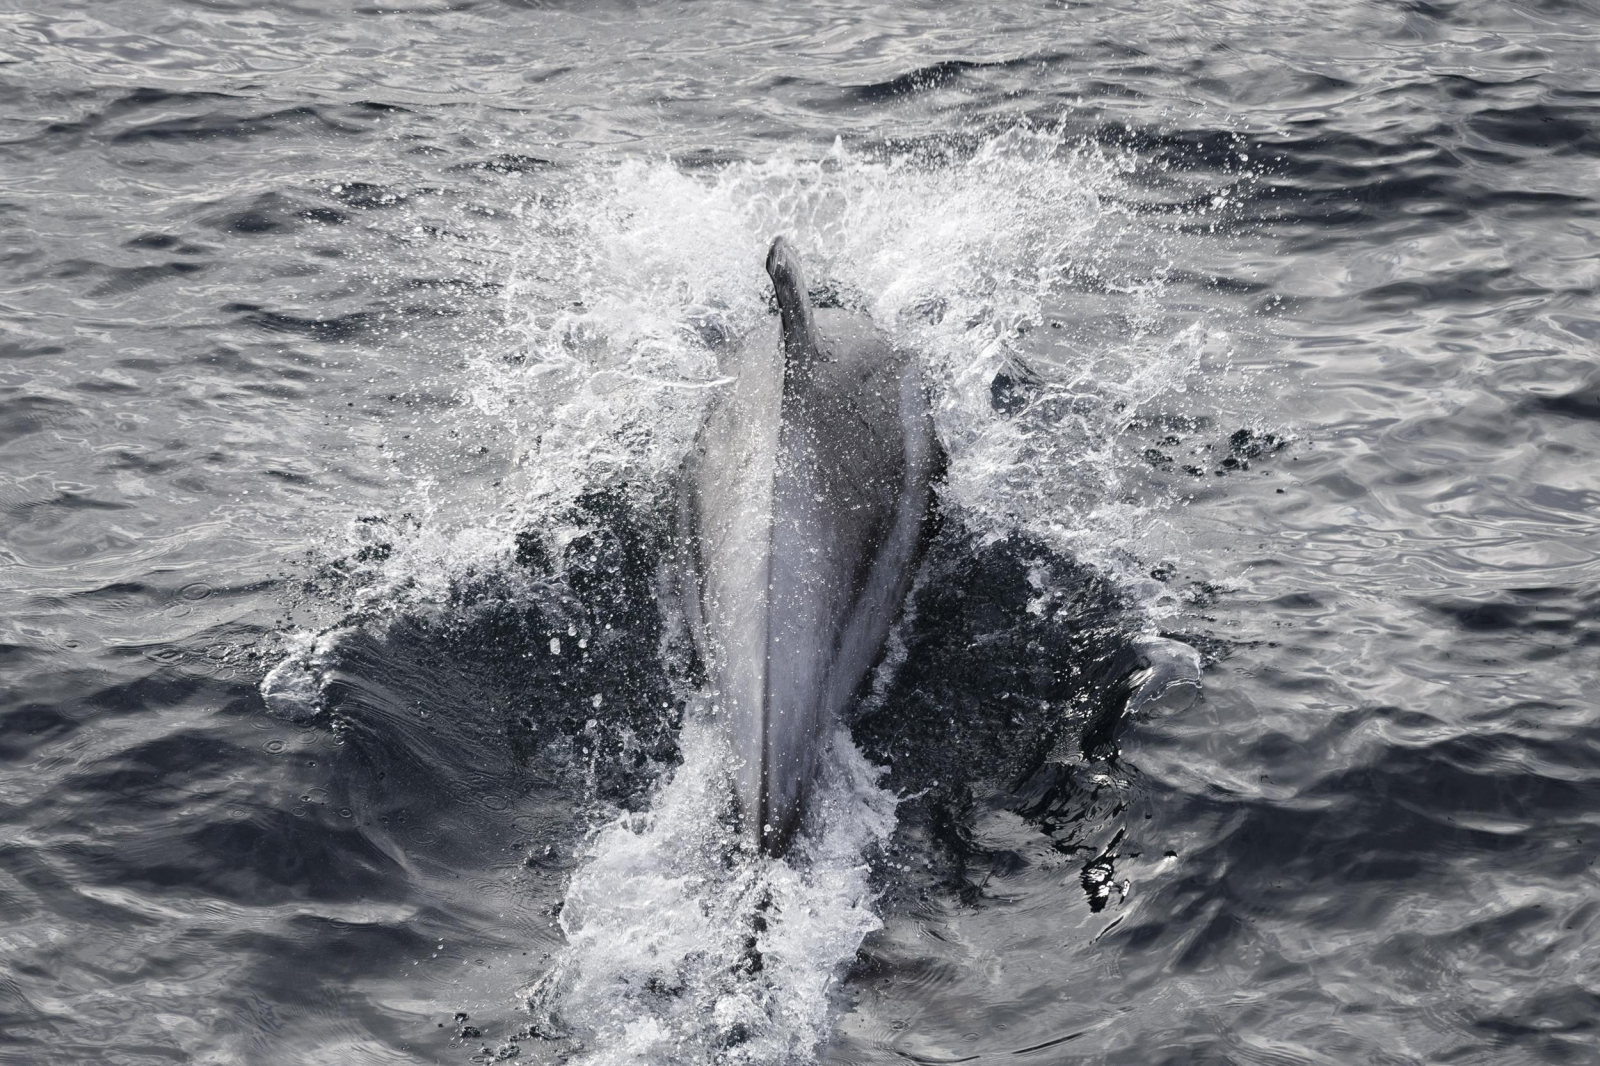 White beaked dolphin in the Barents sea. Photo courtesy of Nick Cobbing / Greenpeace